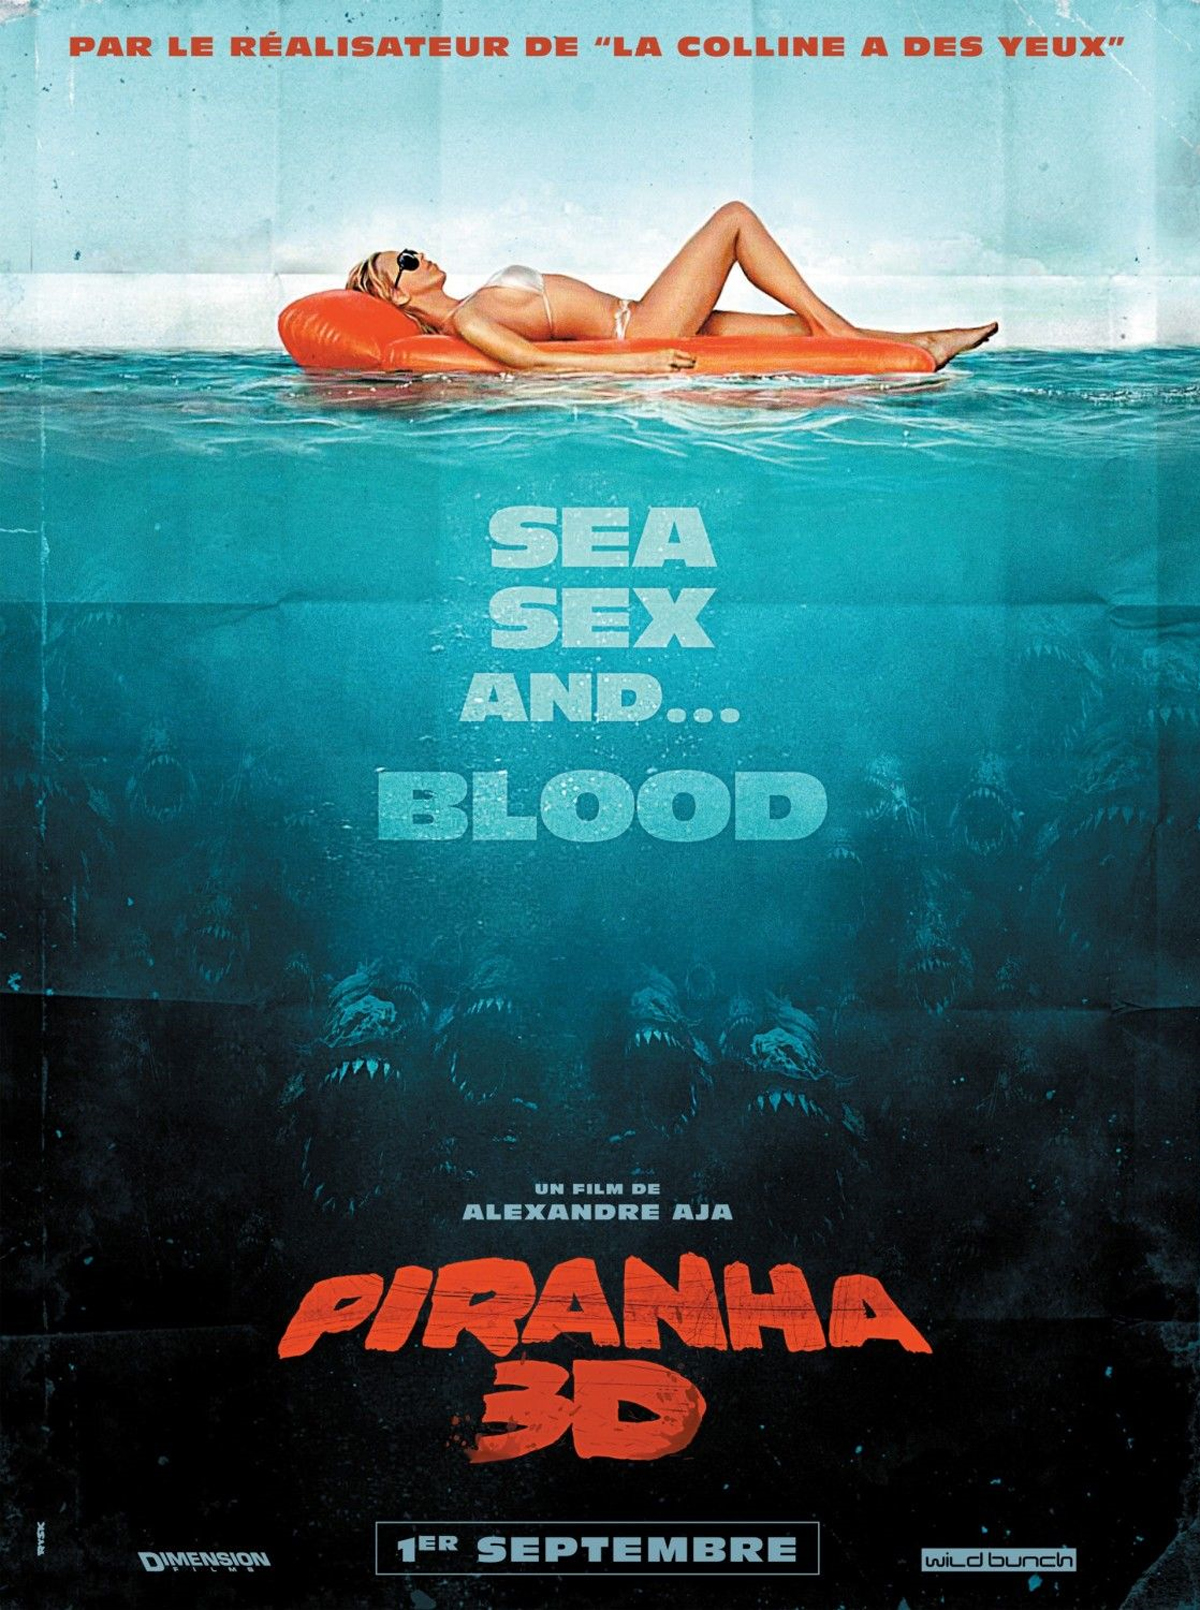 French poster for Piranha 3D